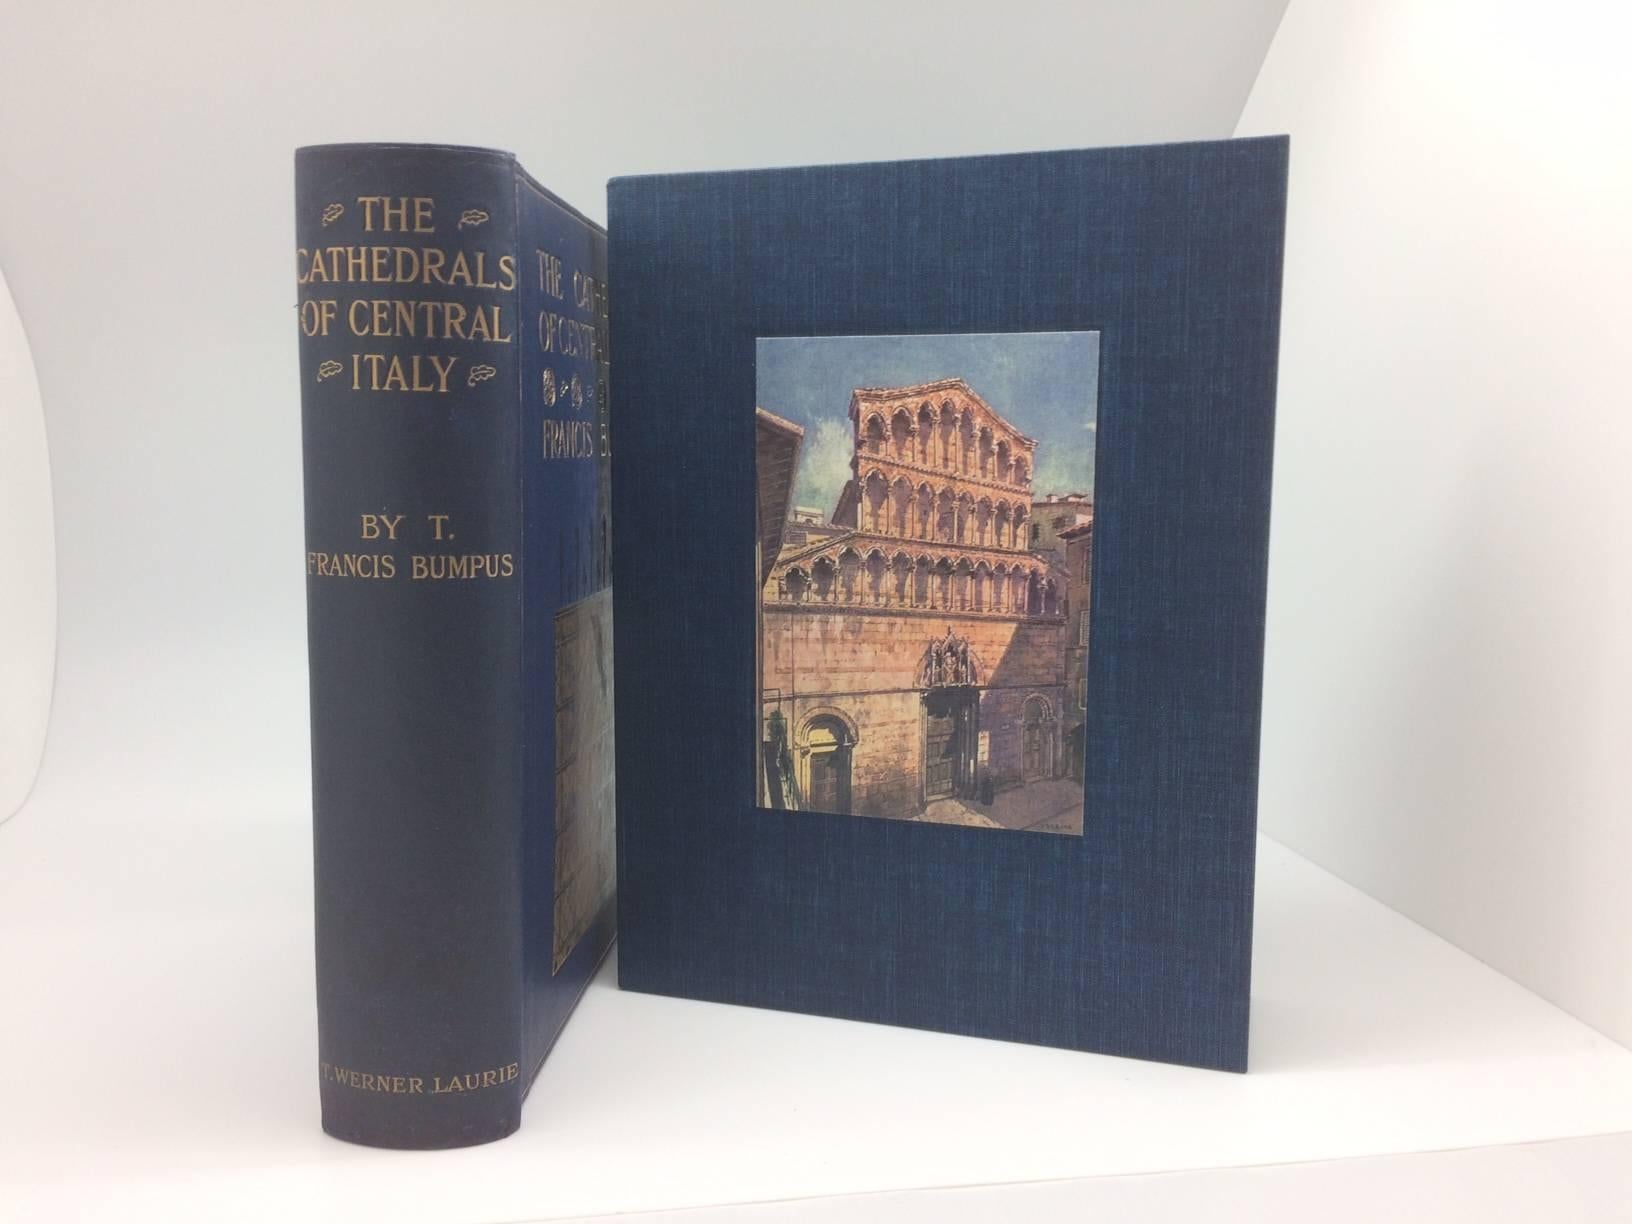 Offered is a first edition printing of Cathedrals of Central Italy by Thomas Francis Bumpus. This book was written by one of the foremost authors on European cathedral architecture and takes the reader through the cathedrals across central Italy